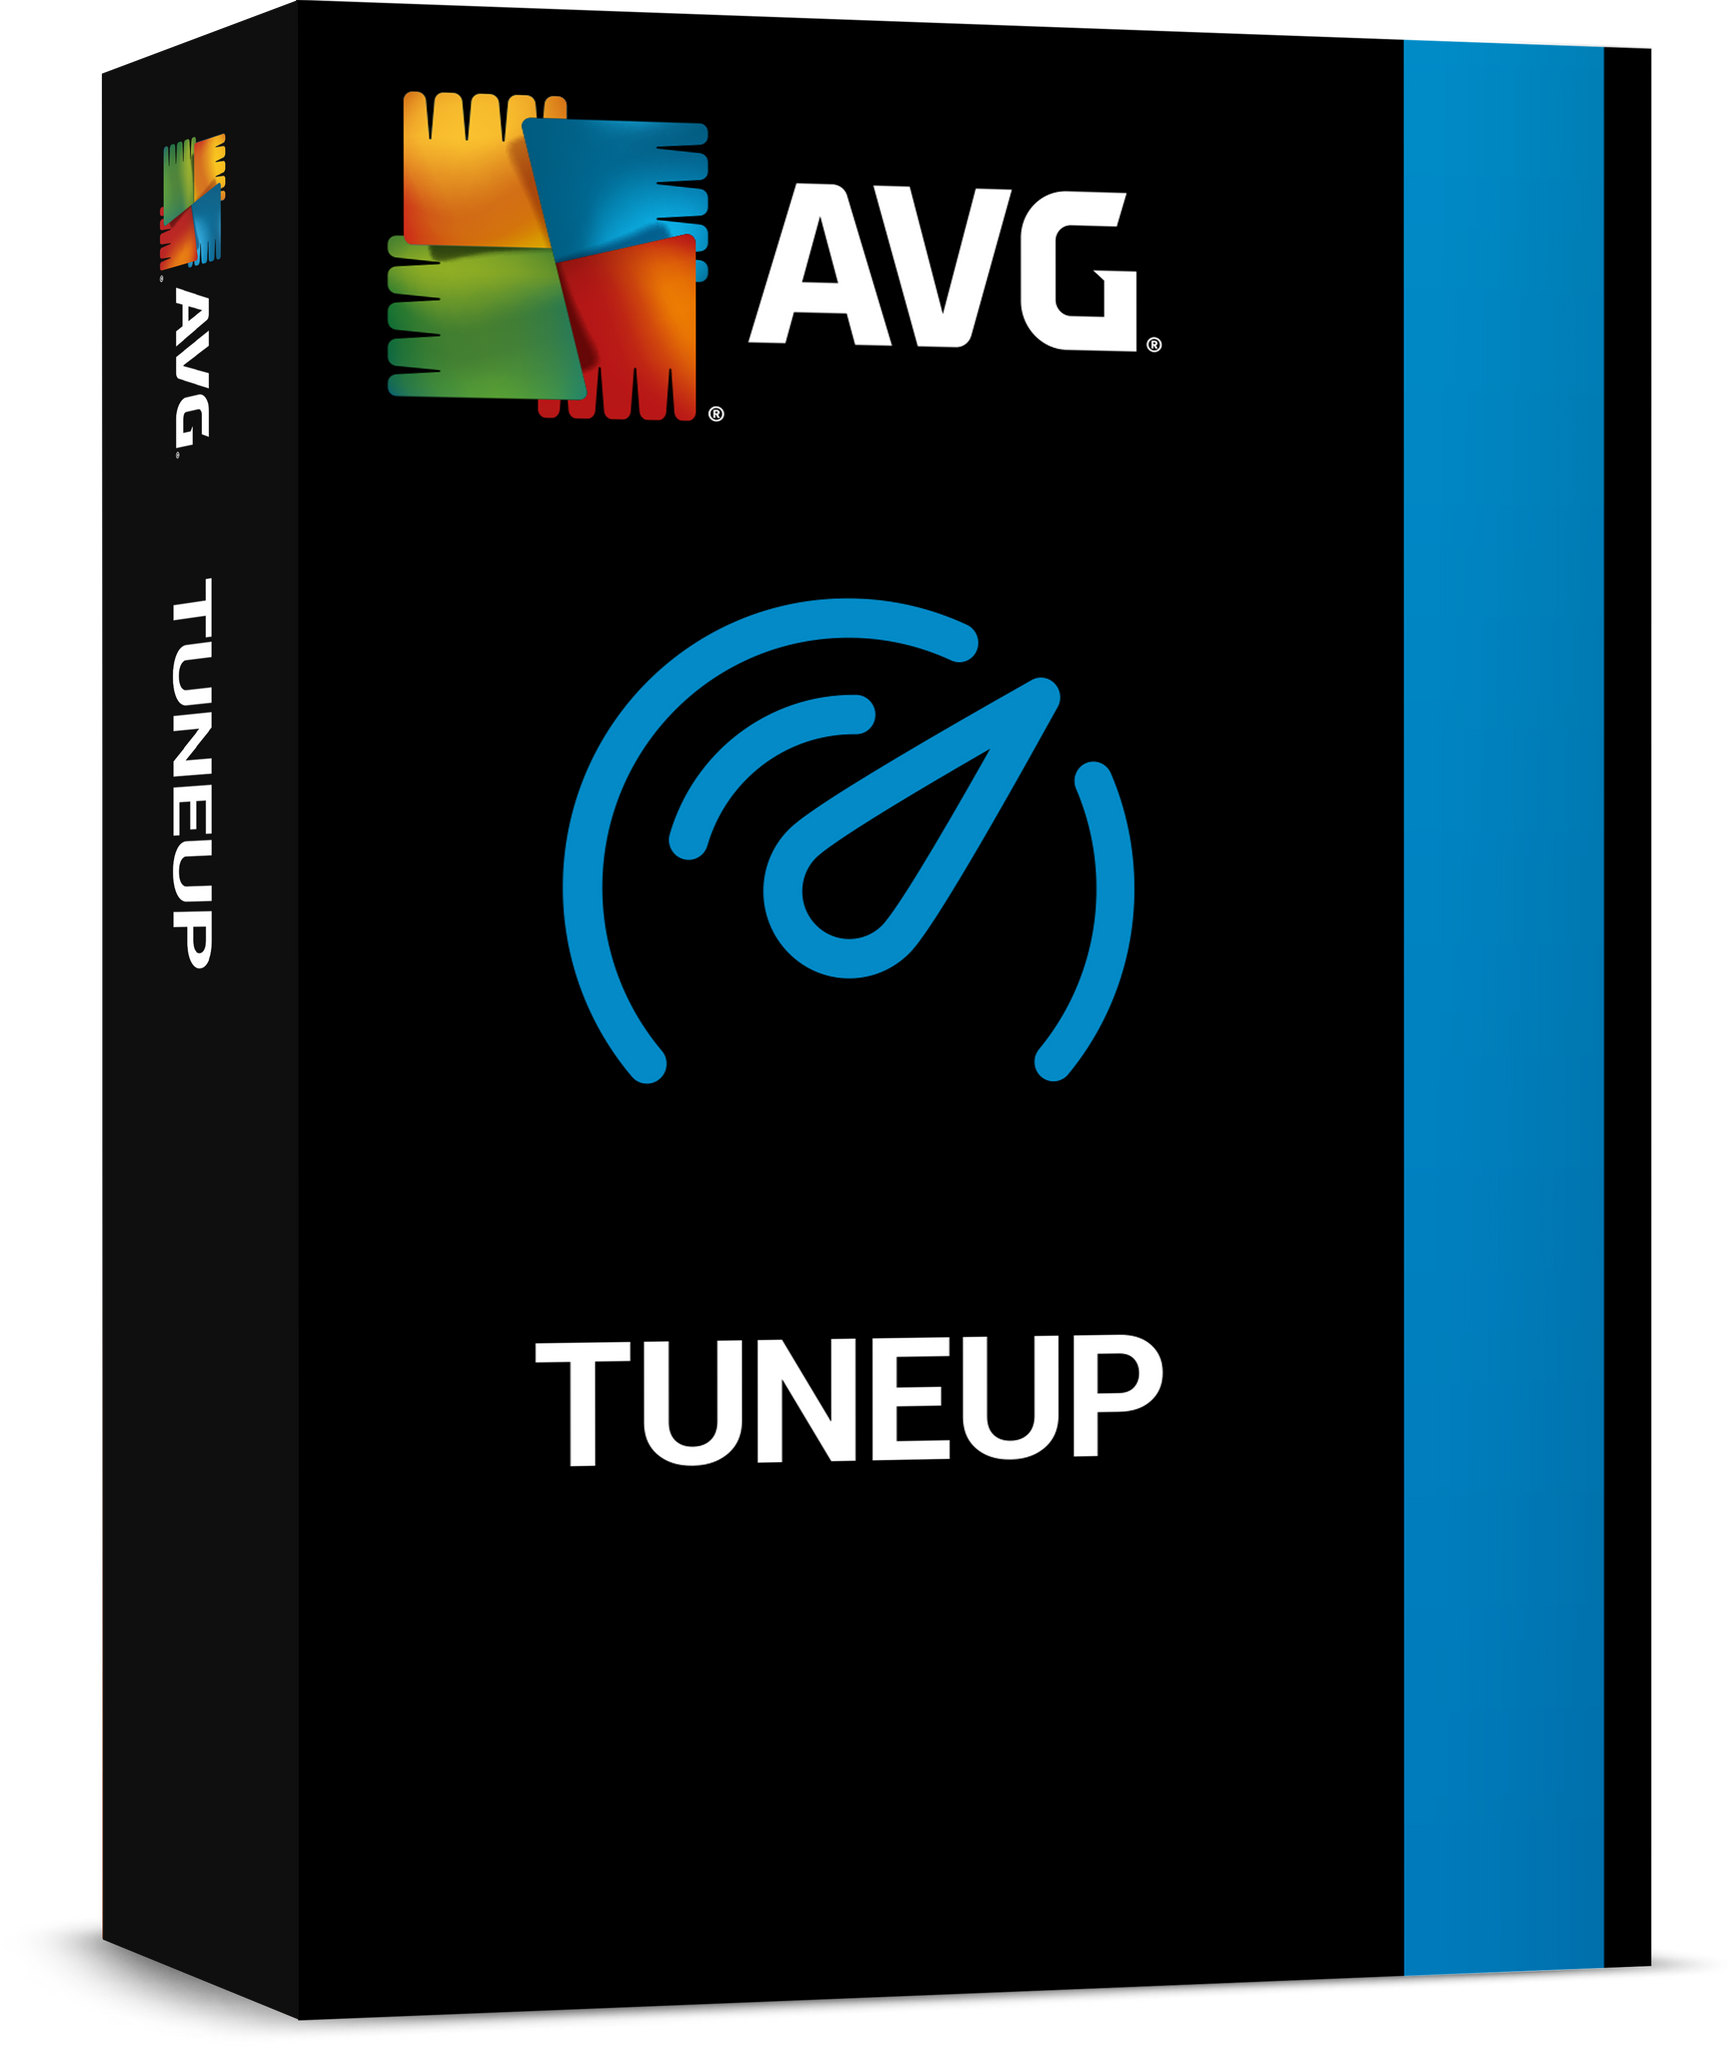 AVG TuneUp for PC 1 Device - 1 Year